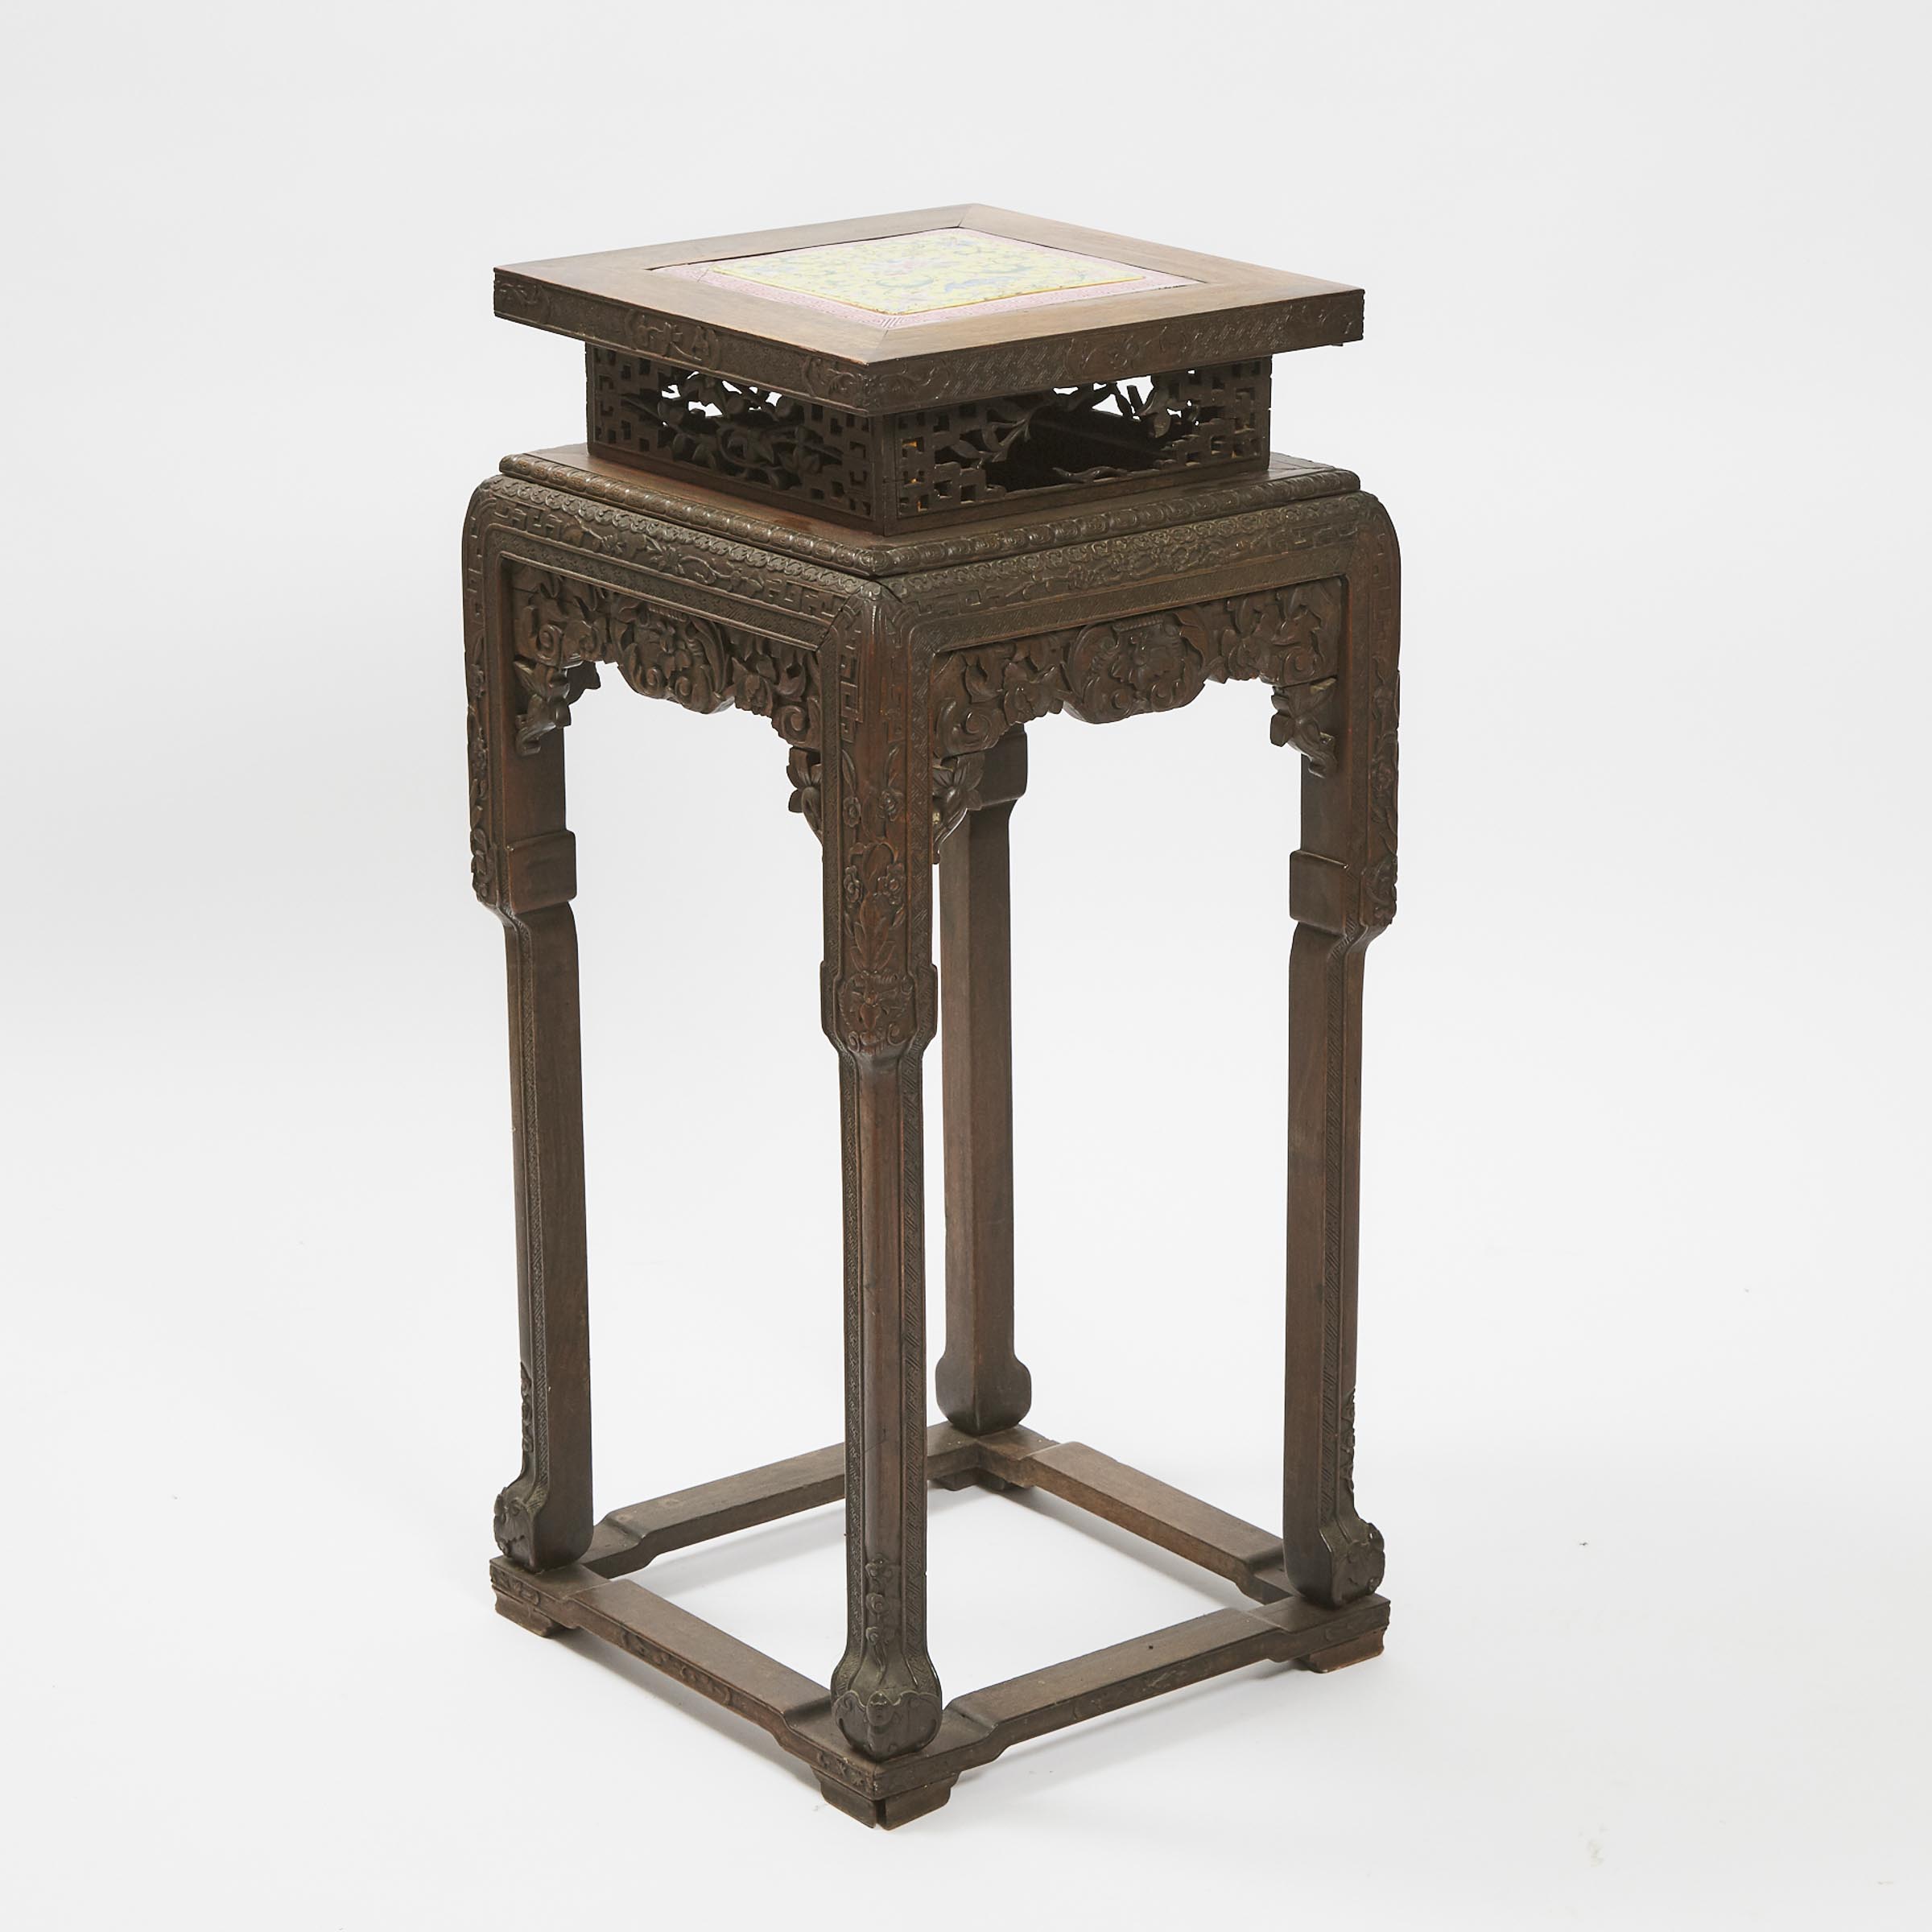 A Chinese Porcelain Panel-Inset Rosewood Stand, 19th Century